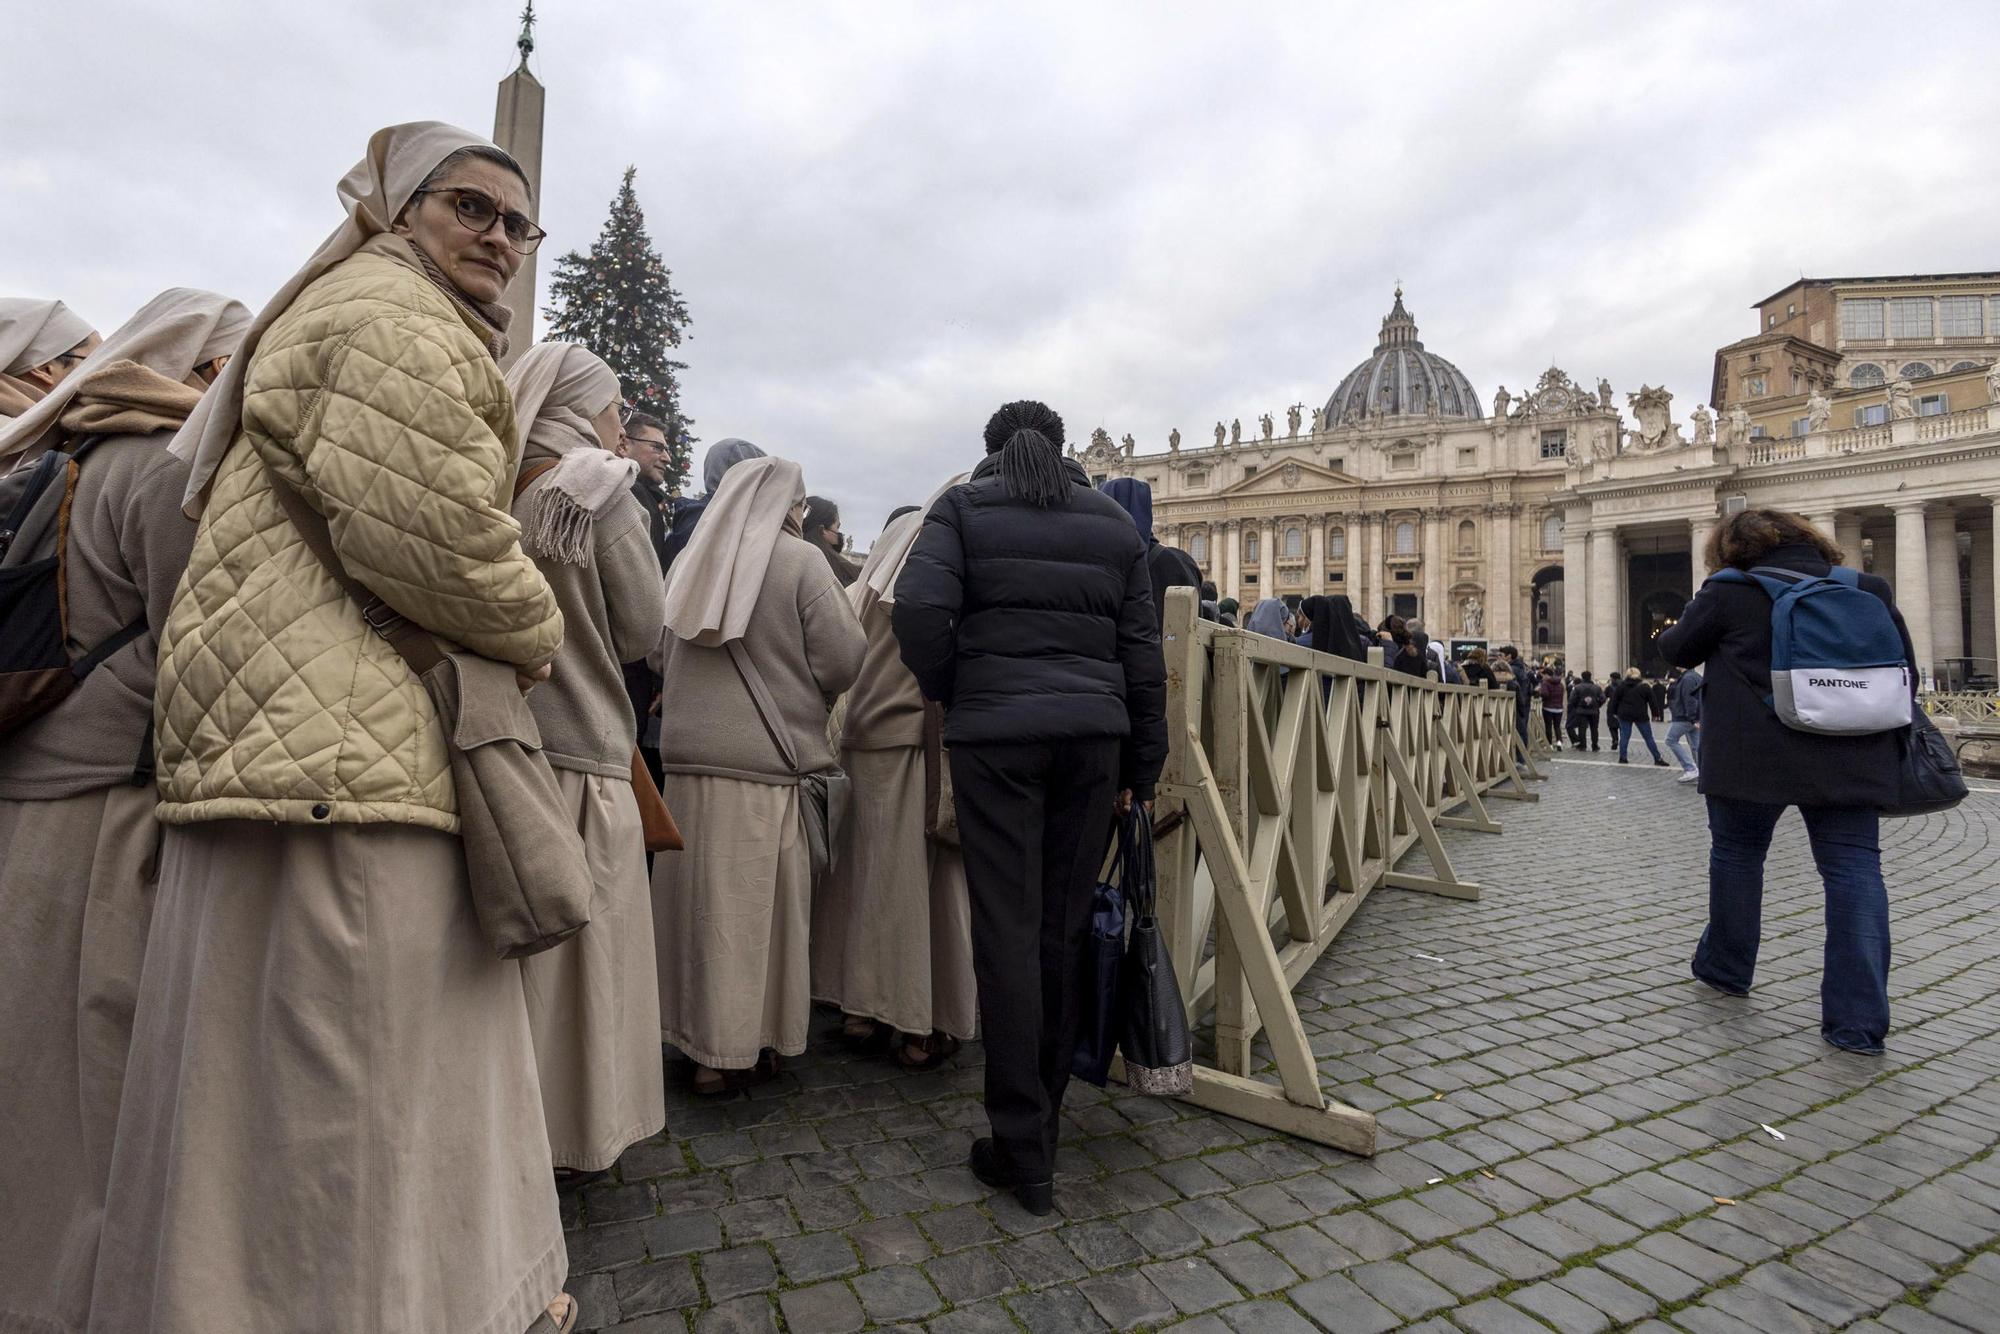 Pope Emeritus Benedict XVI's body to lie in state in St. Peter's Basilica for public viewing